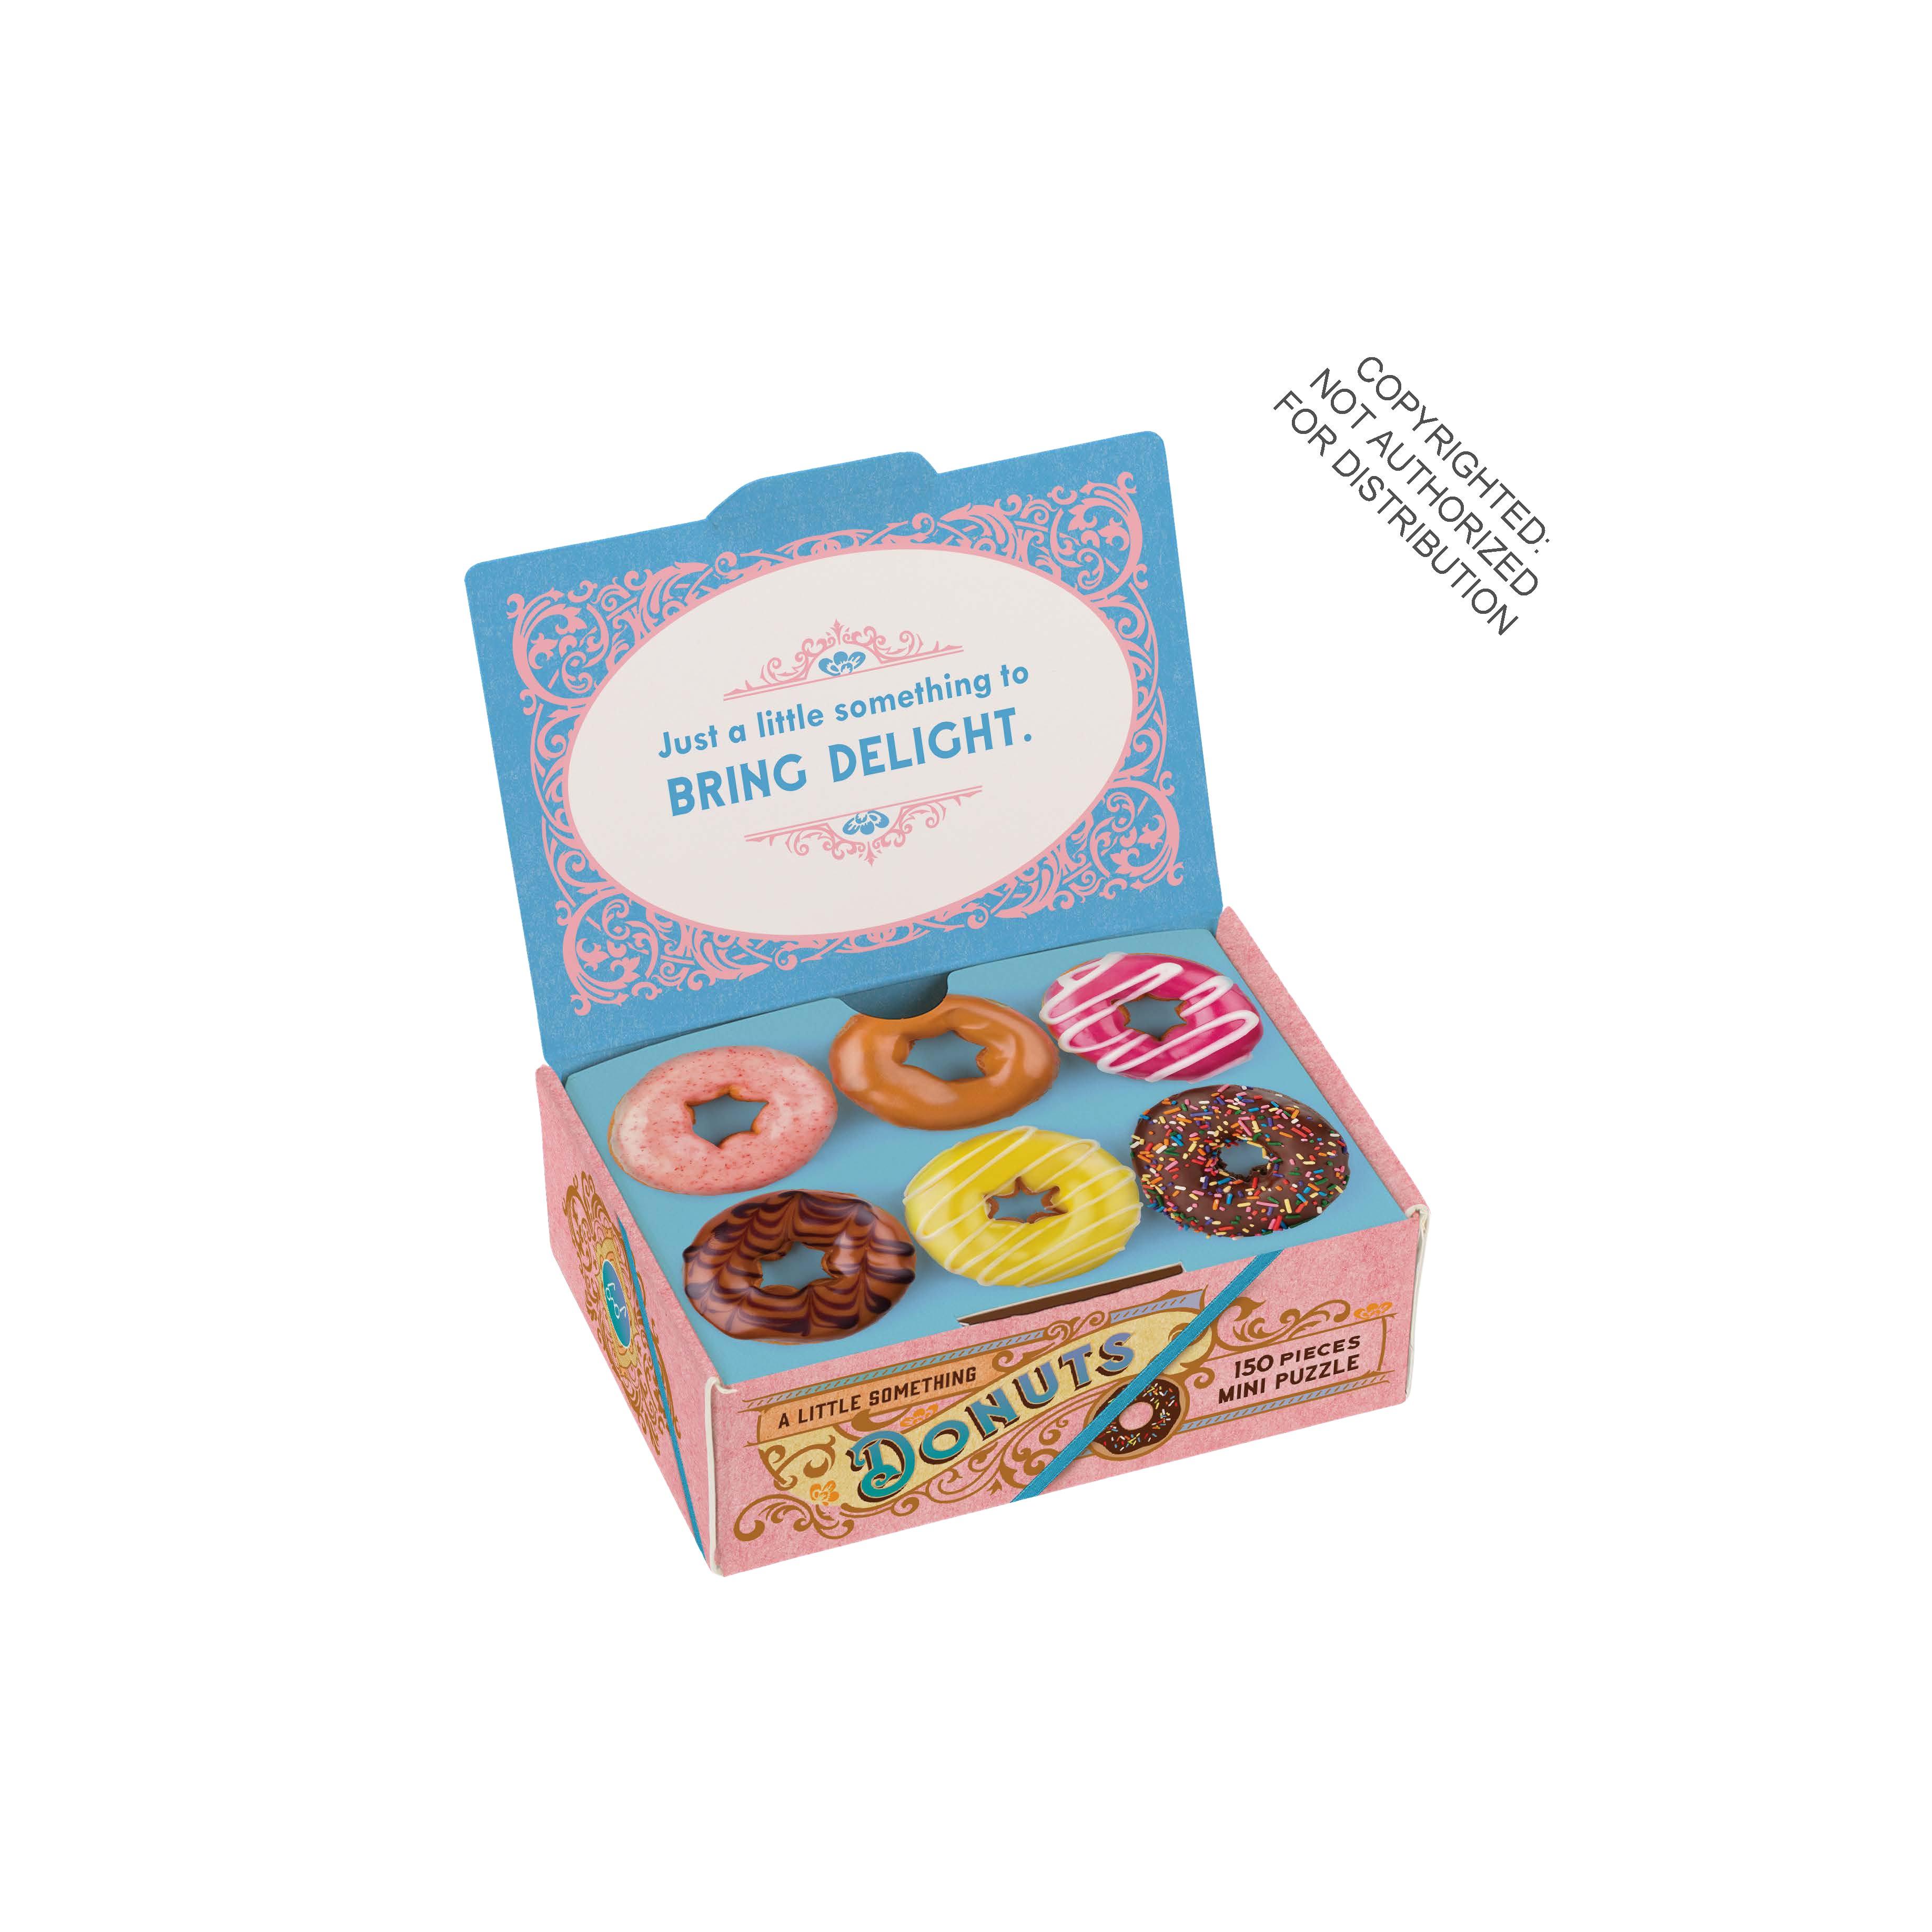 A Little Something Donuts 150-Piece Mini Puzzle